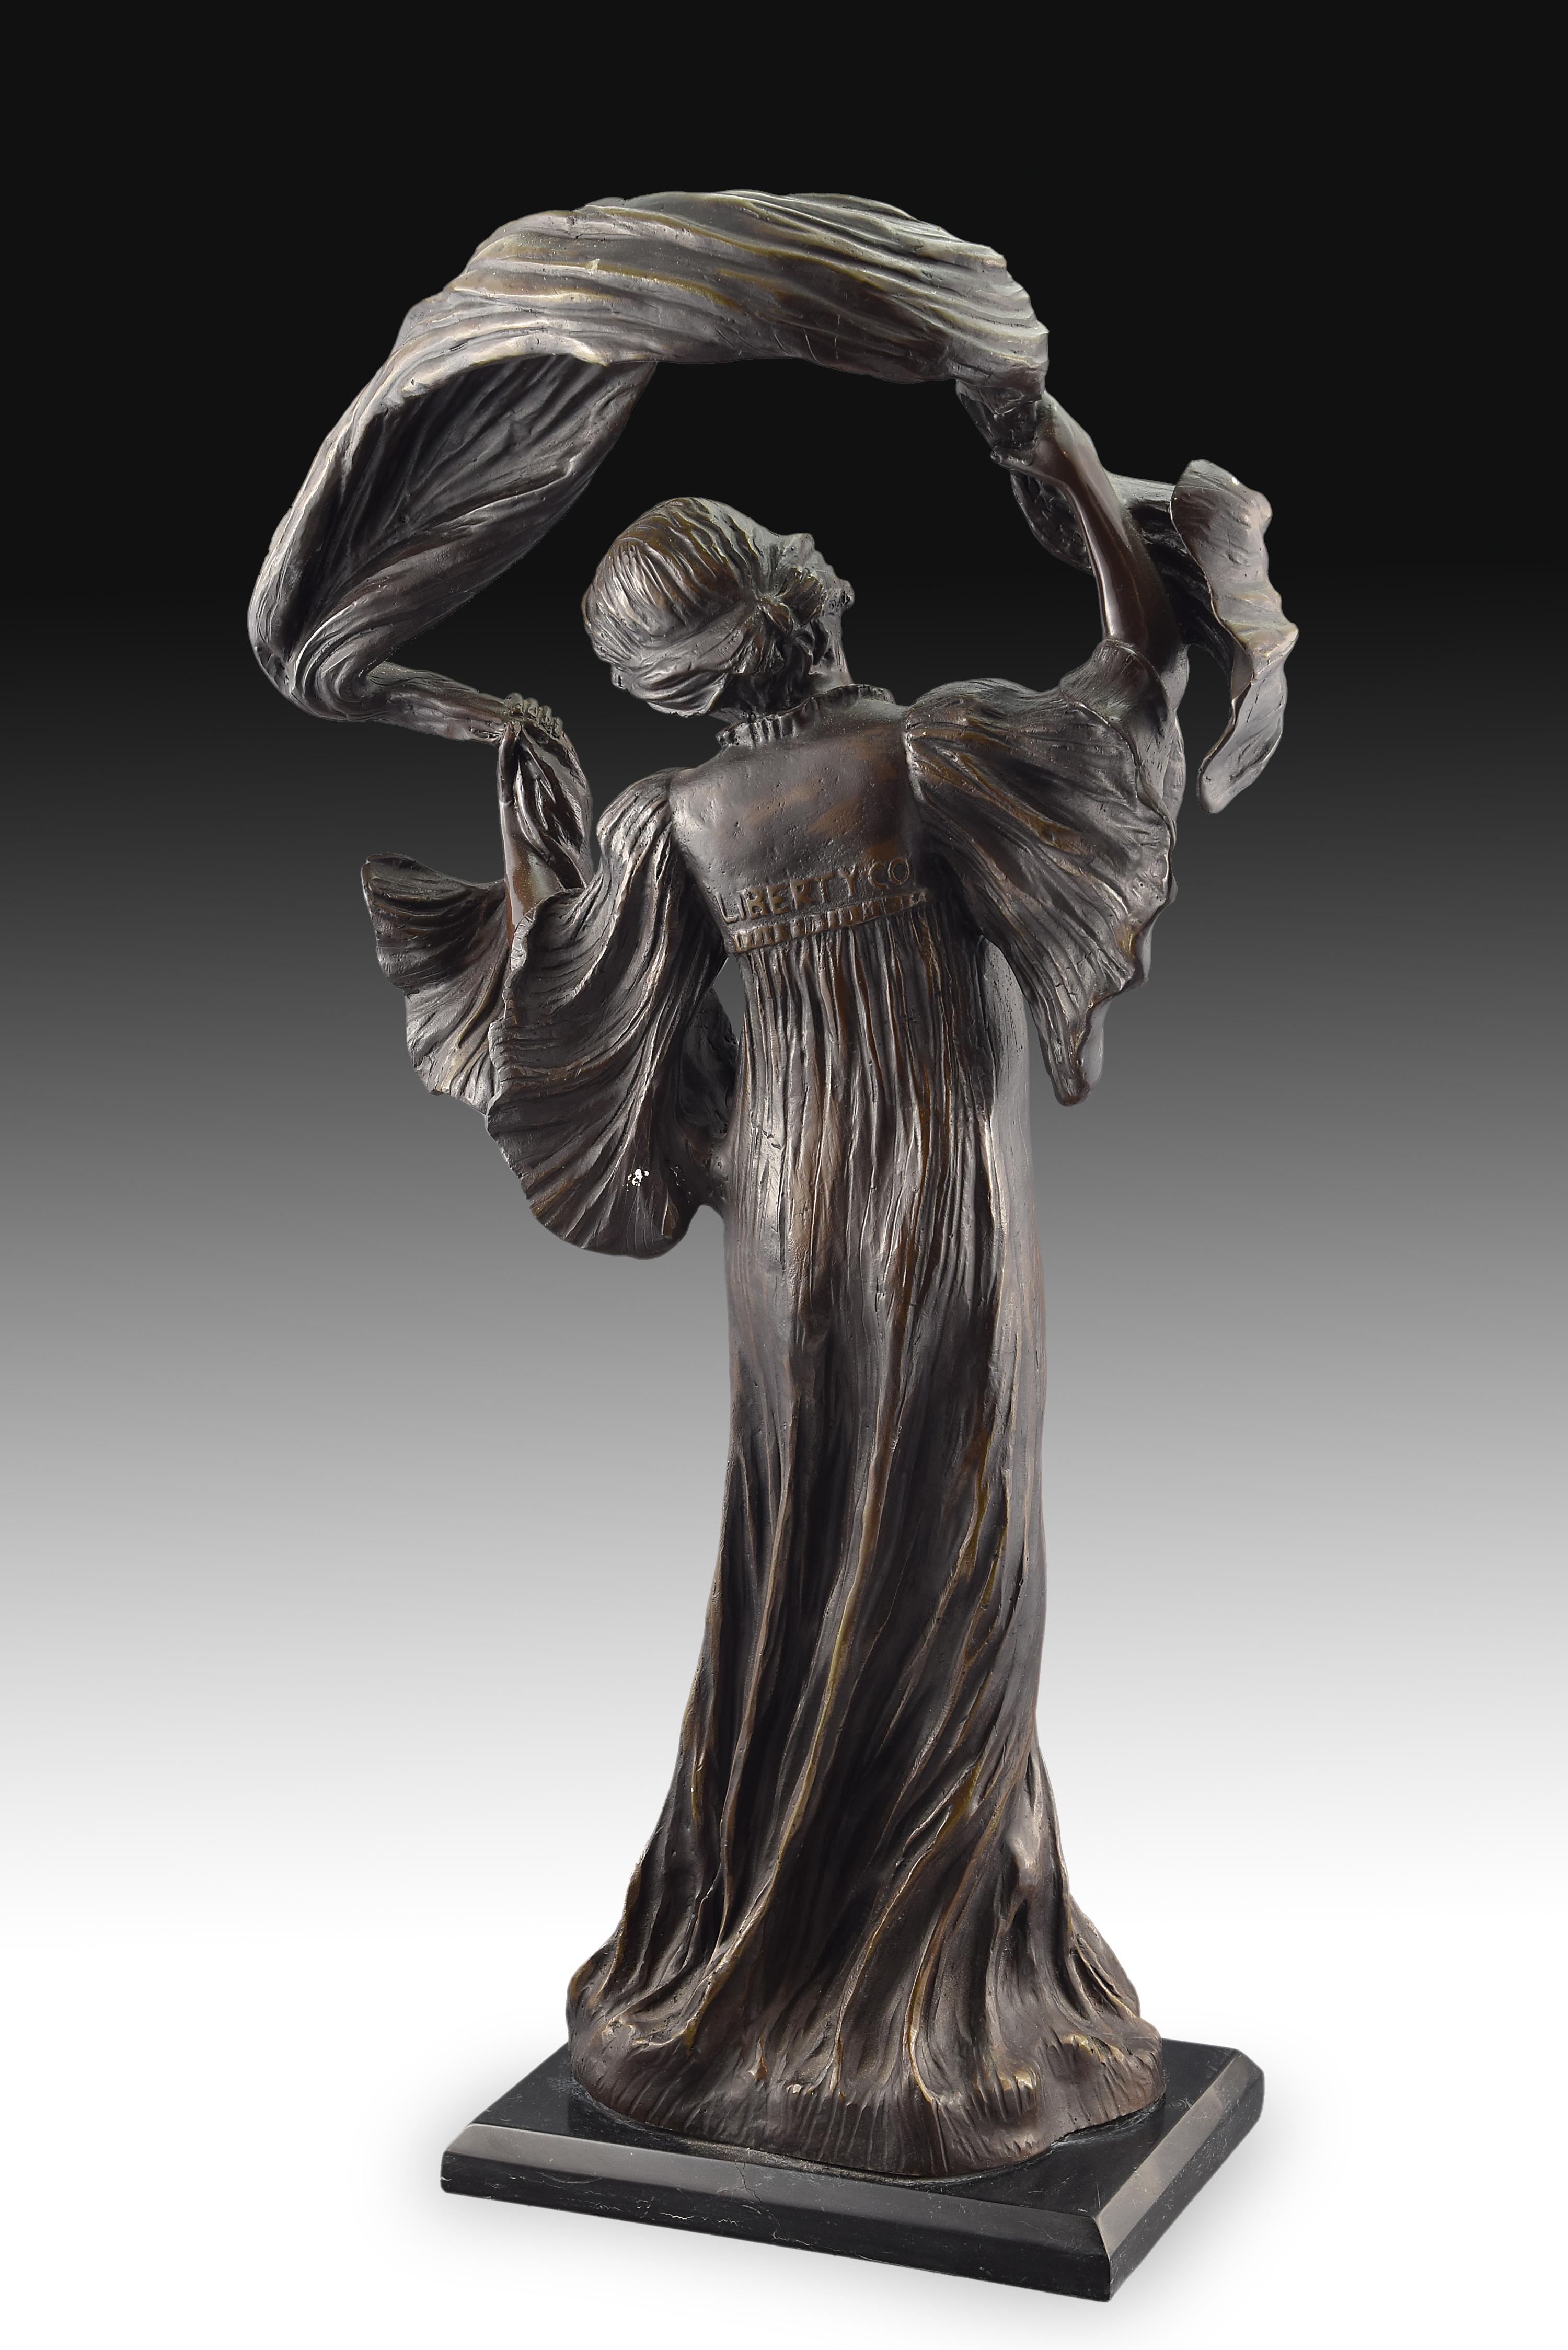 European Lady with Shawl, Bronze, after Models from Agathon Léonard 'Dit', ‘1841-1923’